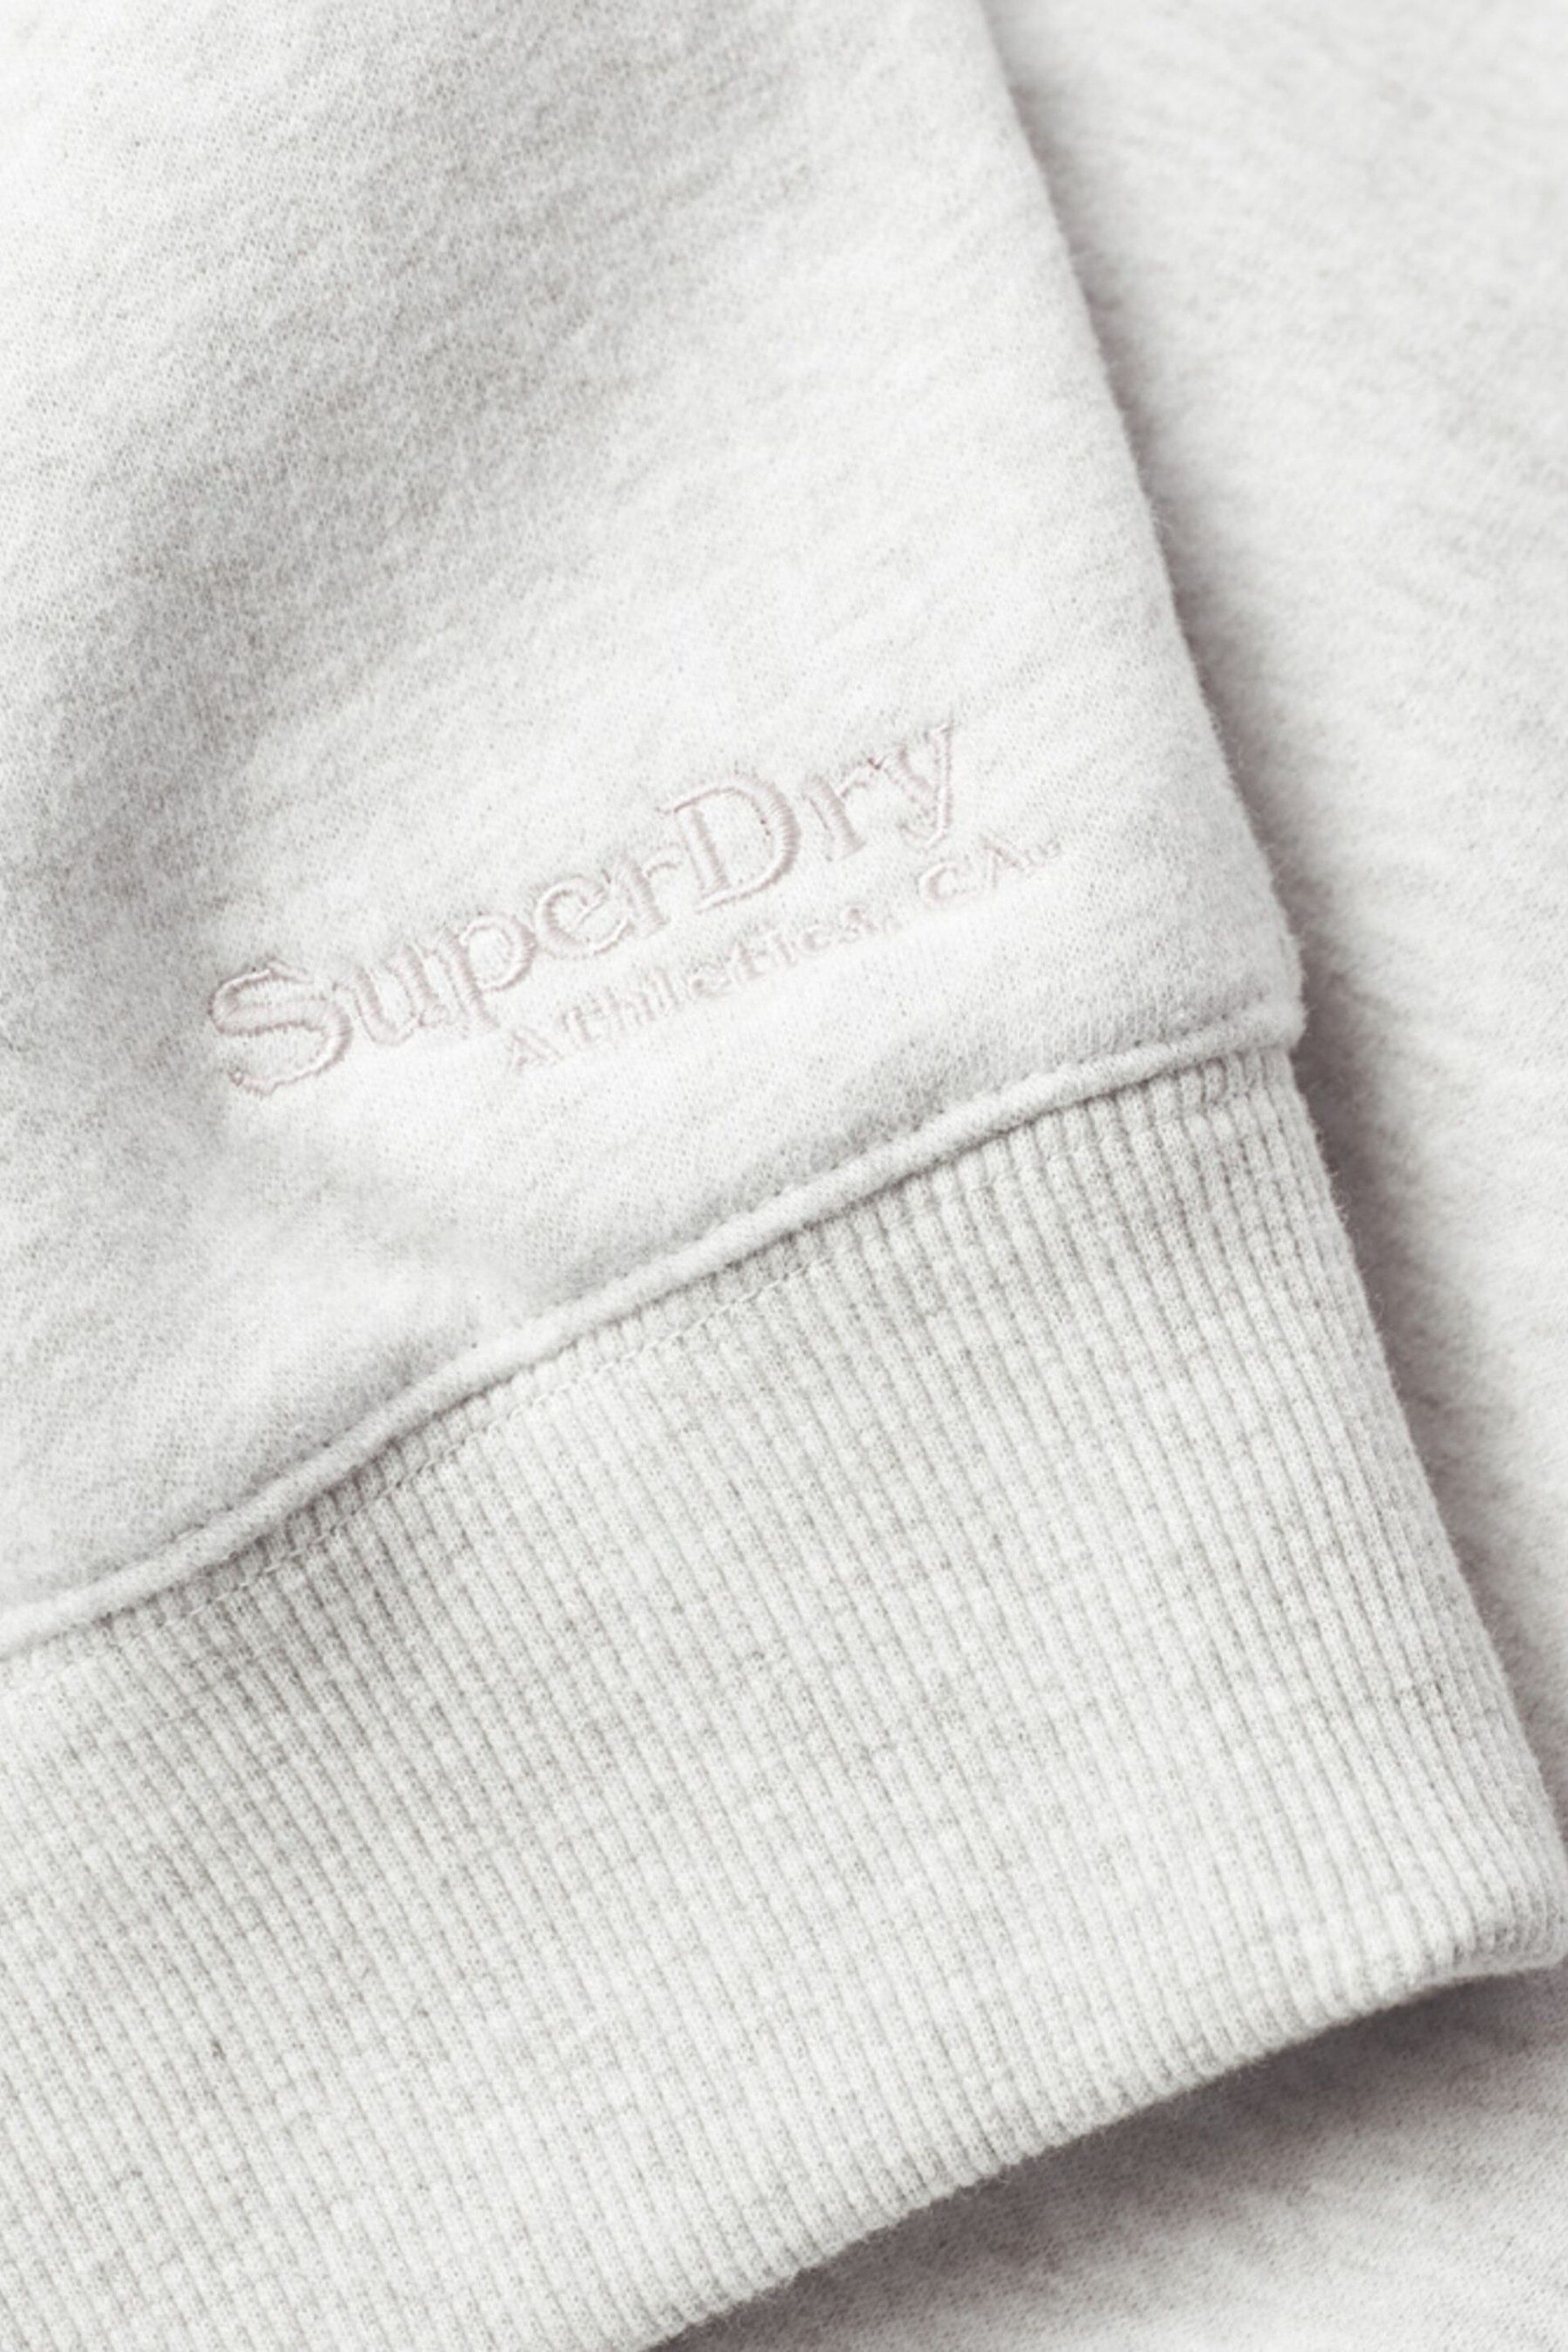 Superdry Grey Essential Logo Relaxed Fit Sweatshirt - Image 5 of 5